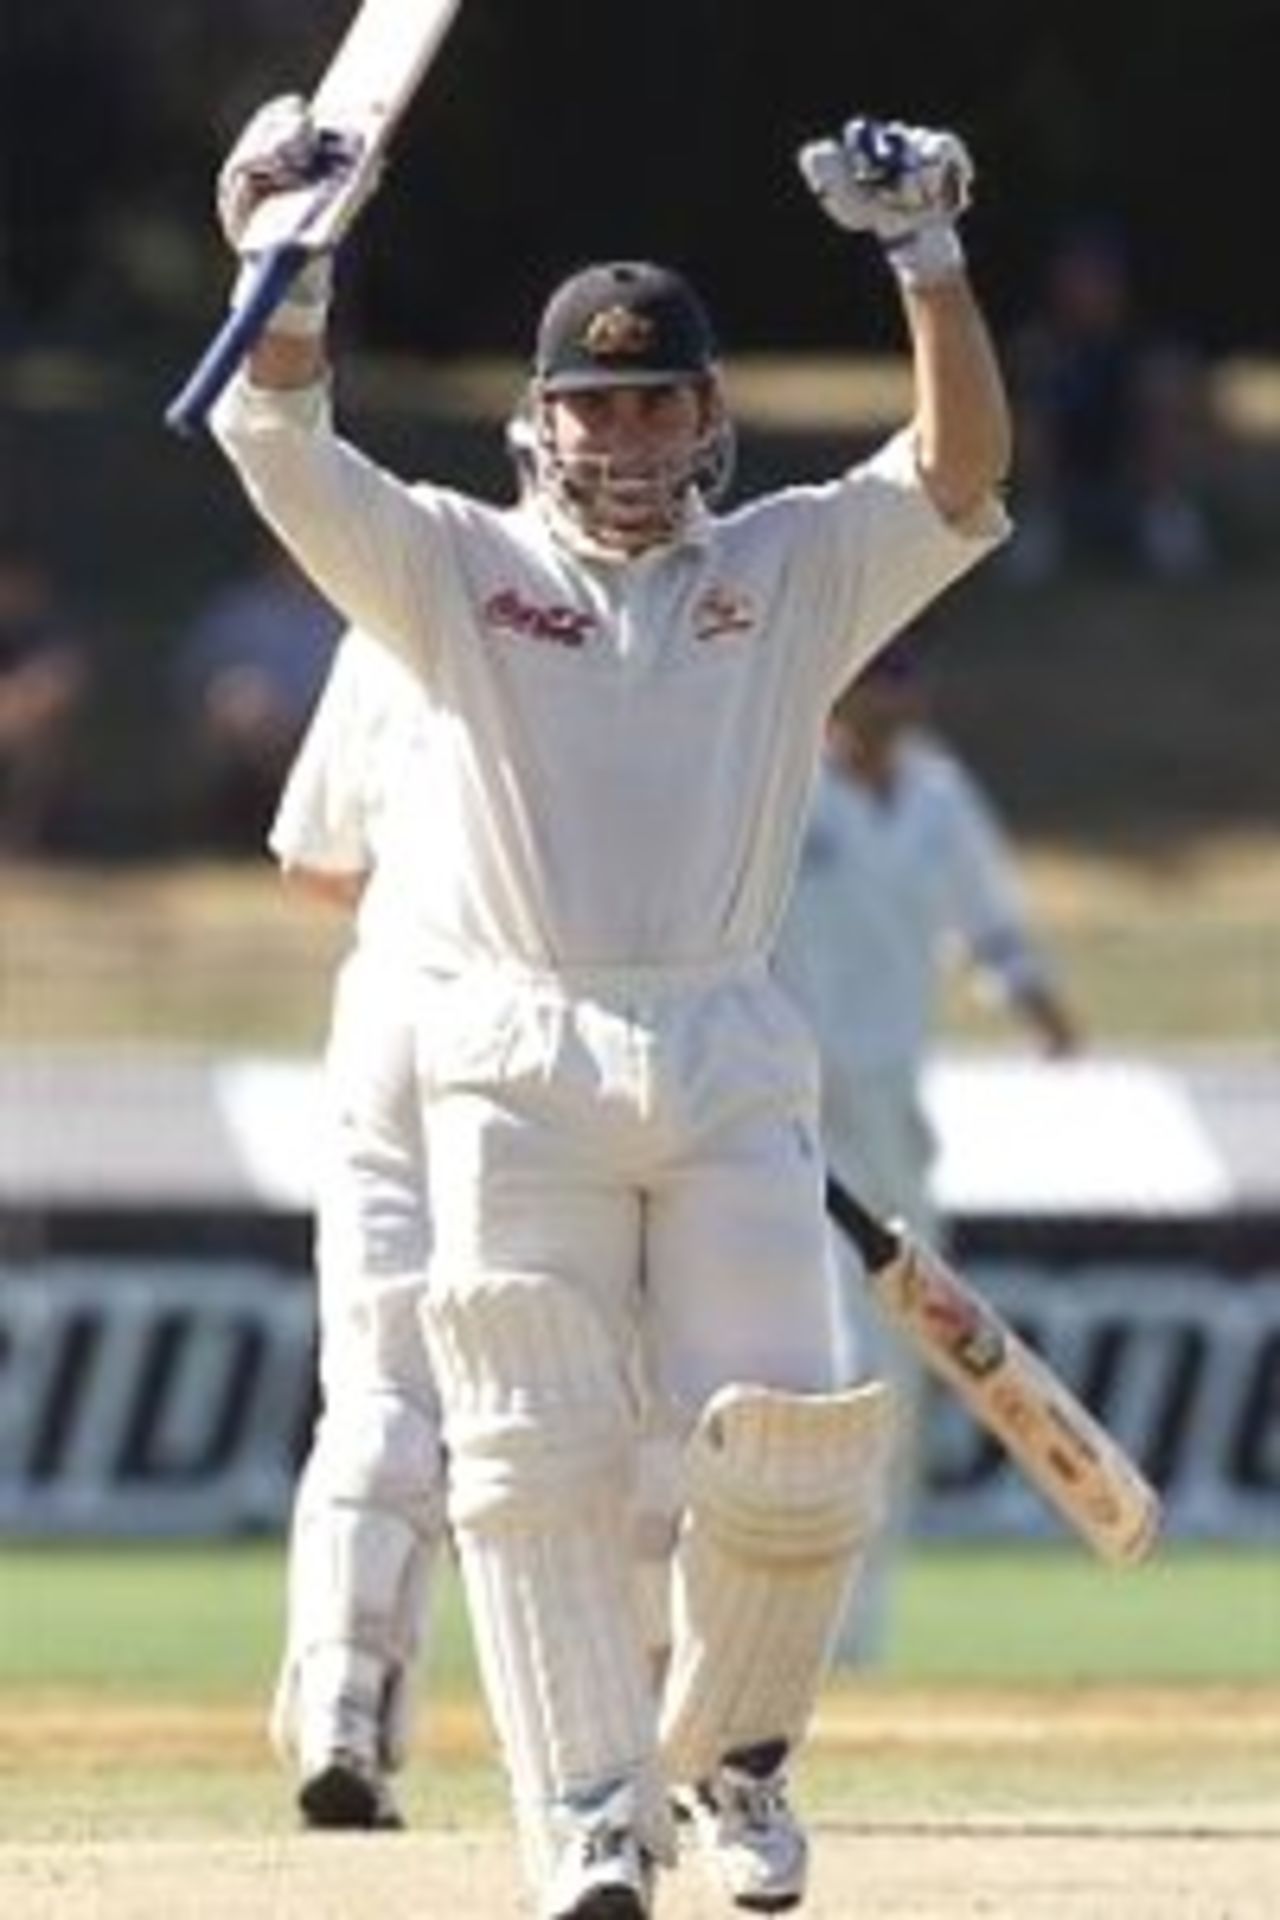 03 Apr 2000: Justin Langer of Australia celerbates his century, during day four of the third test between New Zealand and Australia, at WestpacTrust Park, Hamilton, New Zealand. Australia won by six wickets, to win the series 3-0.